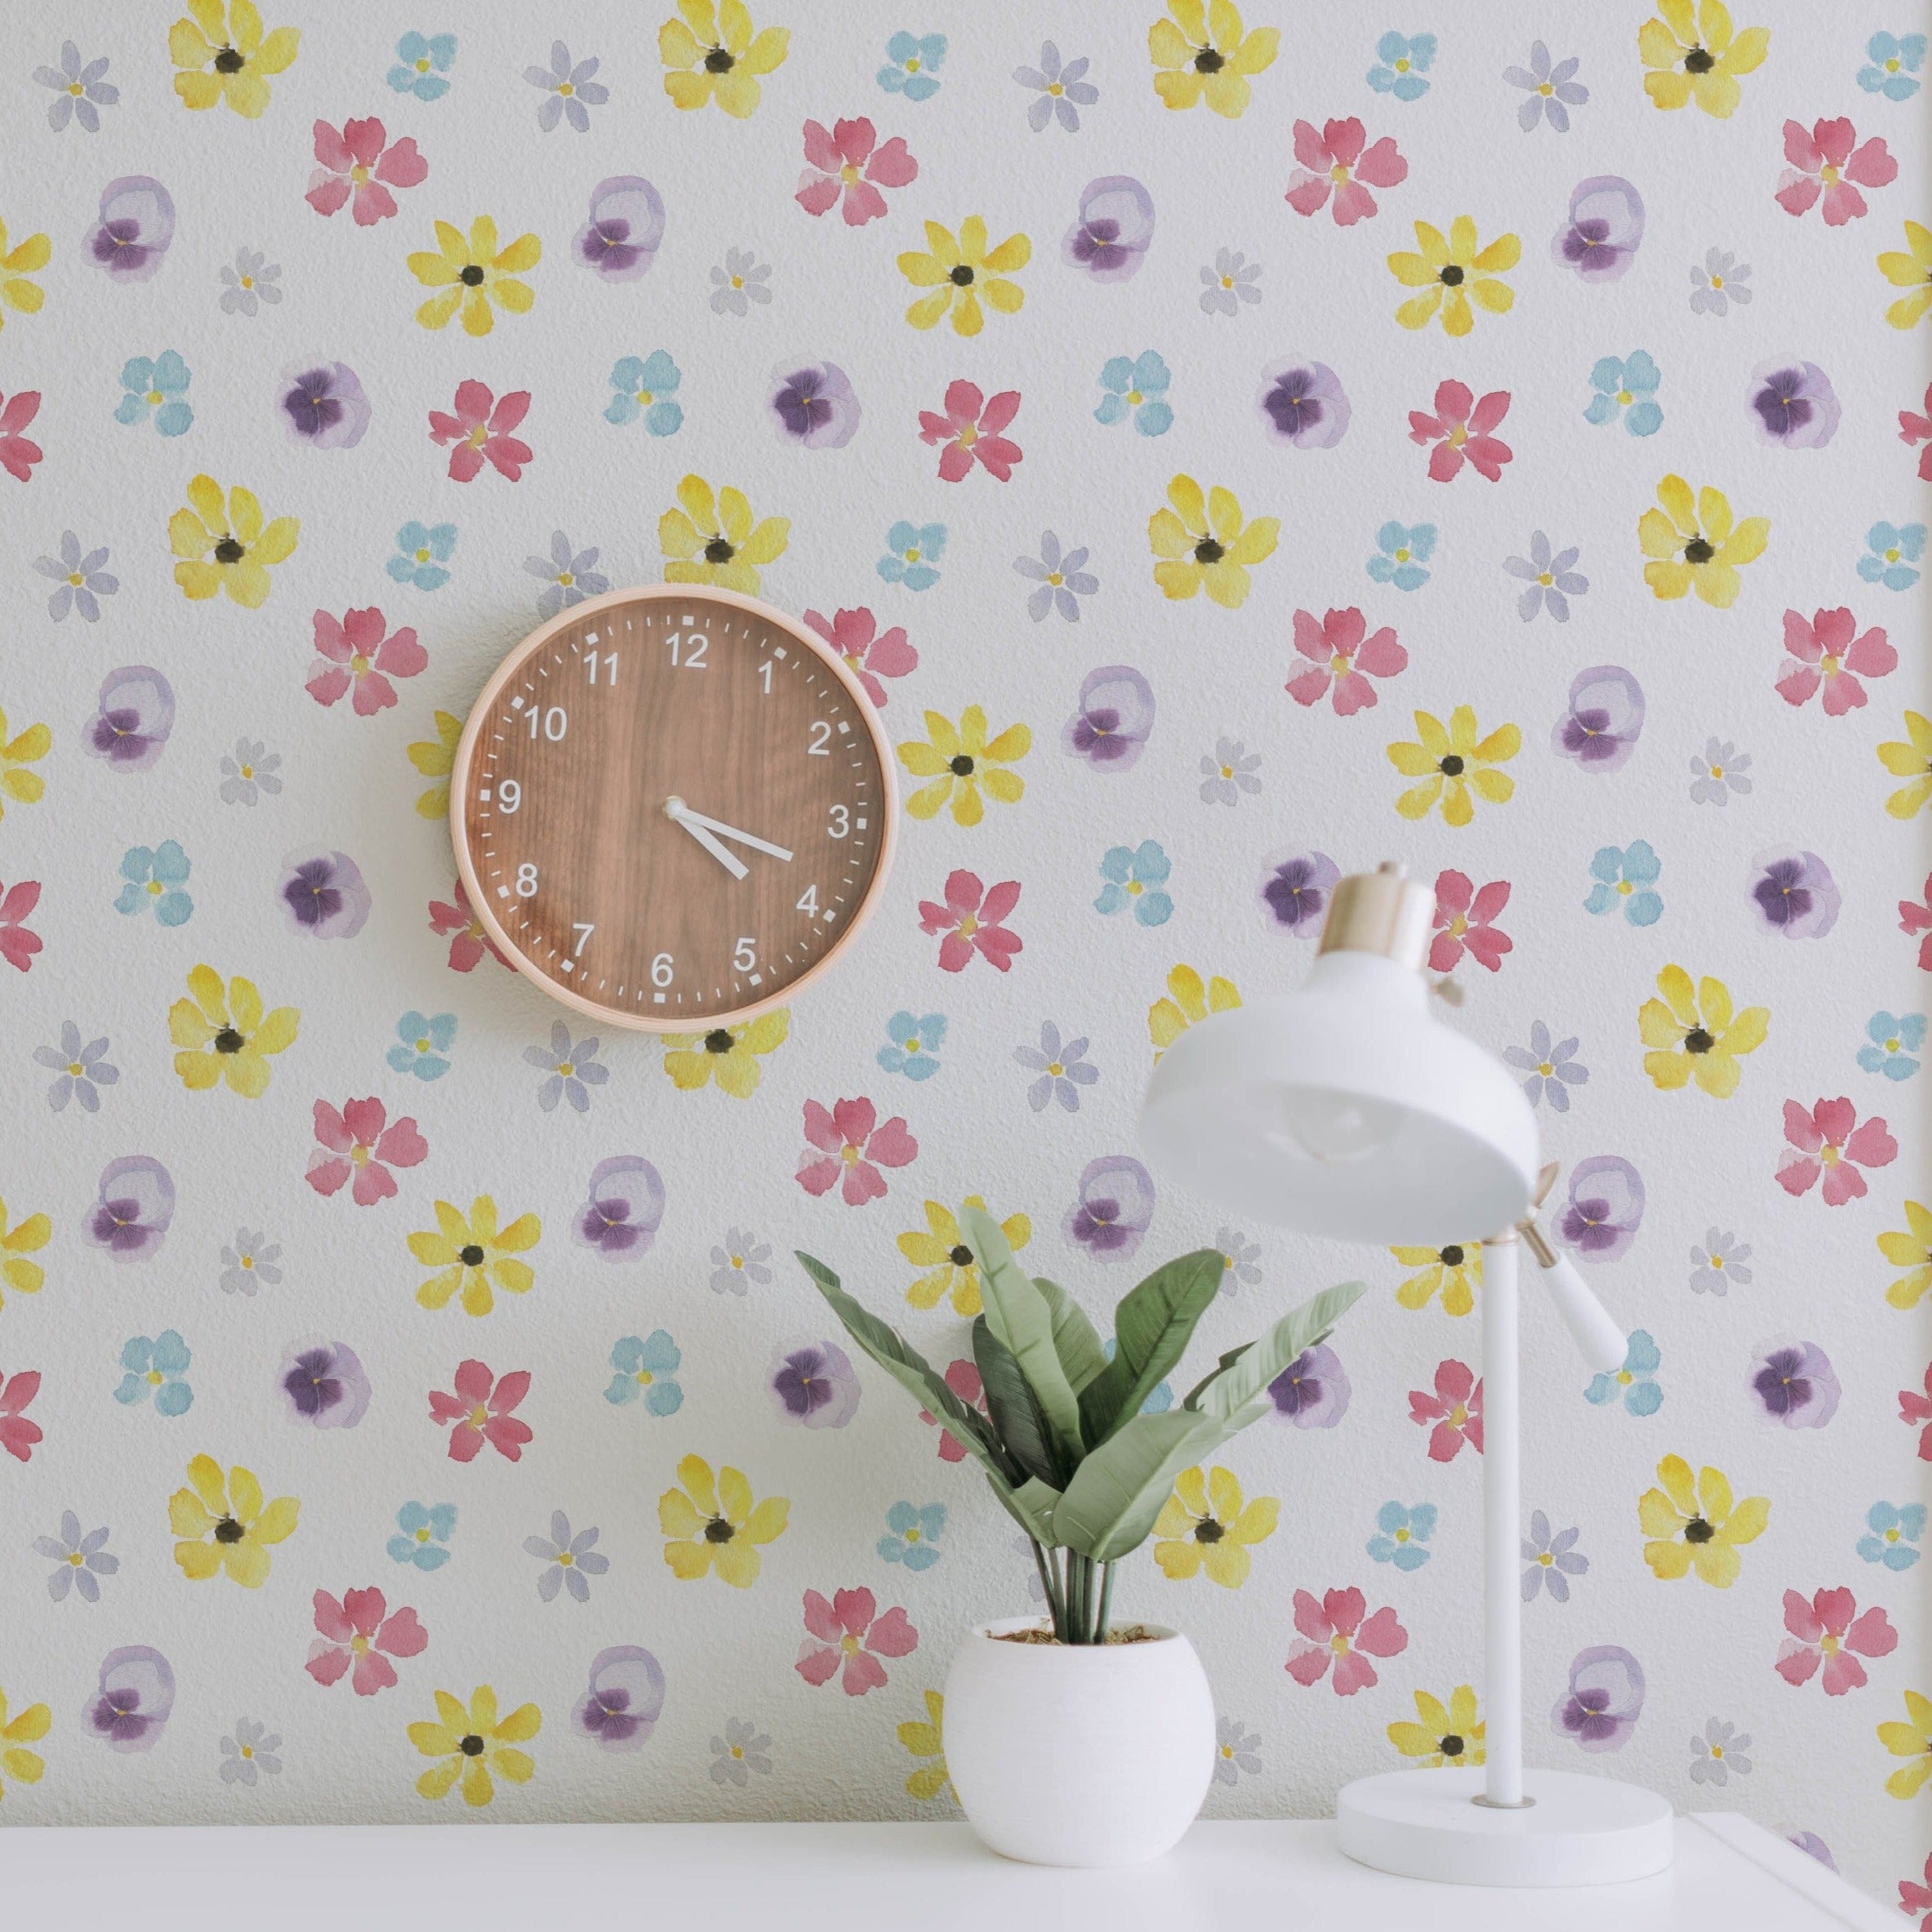 A workspace adorned with the Spring Field Wallpaper - VI, highlighting its lively floral pattern in bright yellow, pink, purple, and blue hues. The space includes a wooden wall clock and a white desk lamp beside a small plant.